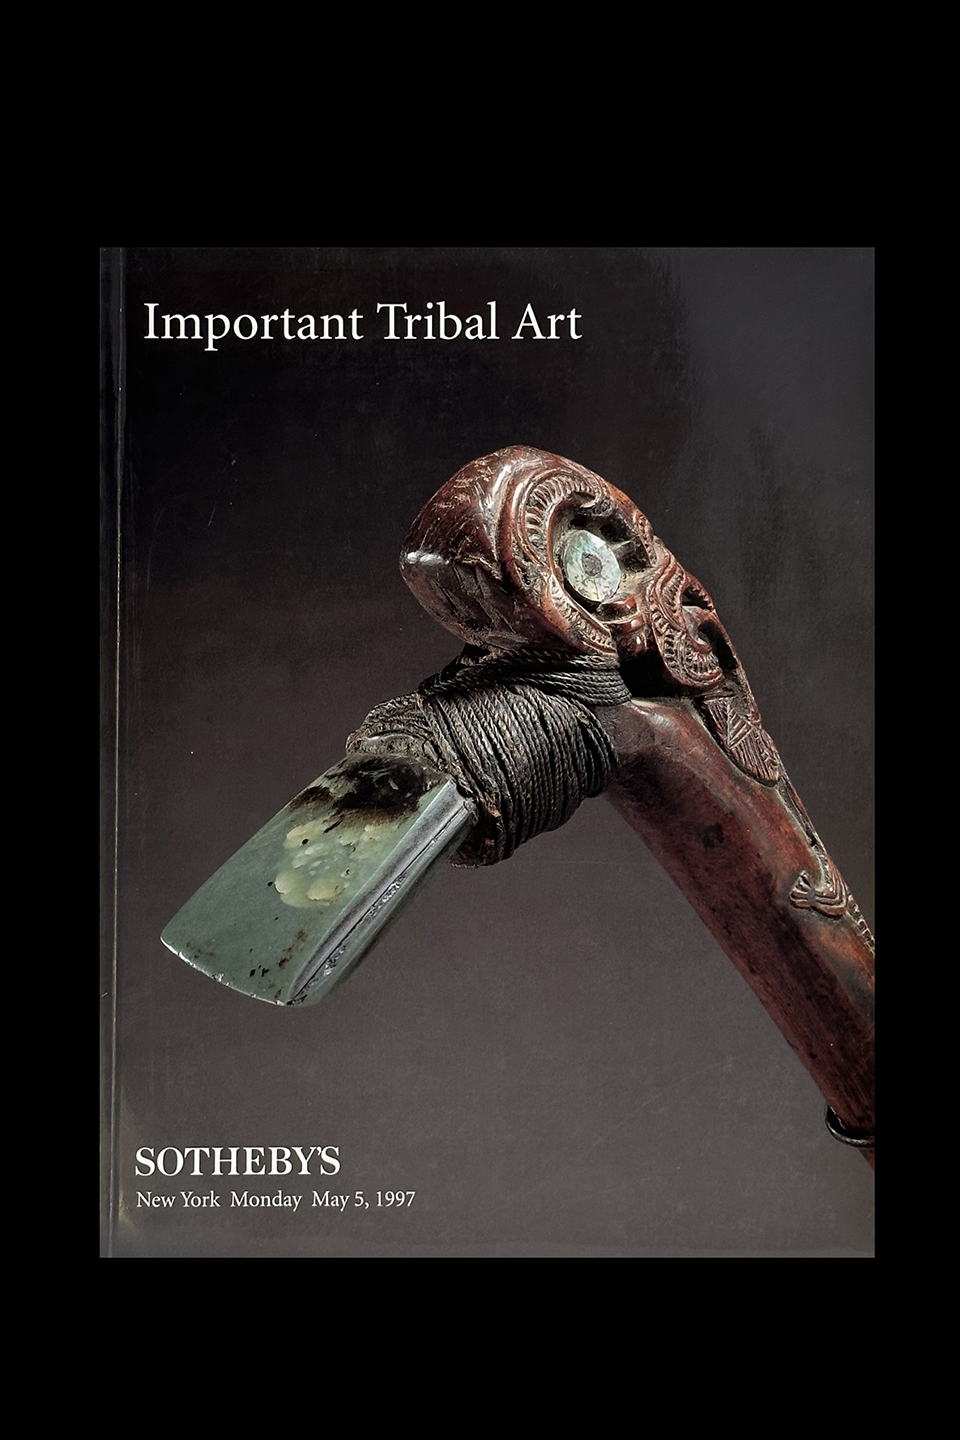 Sotheby's - Important Tribal Art - New York, May, 1997